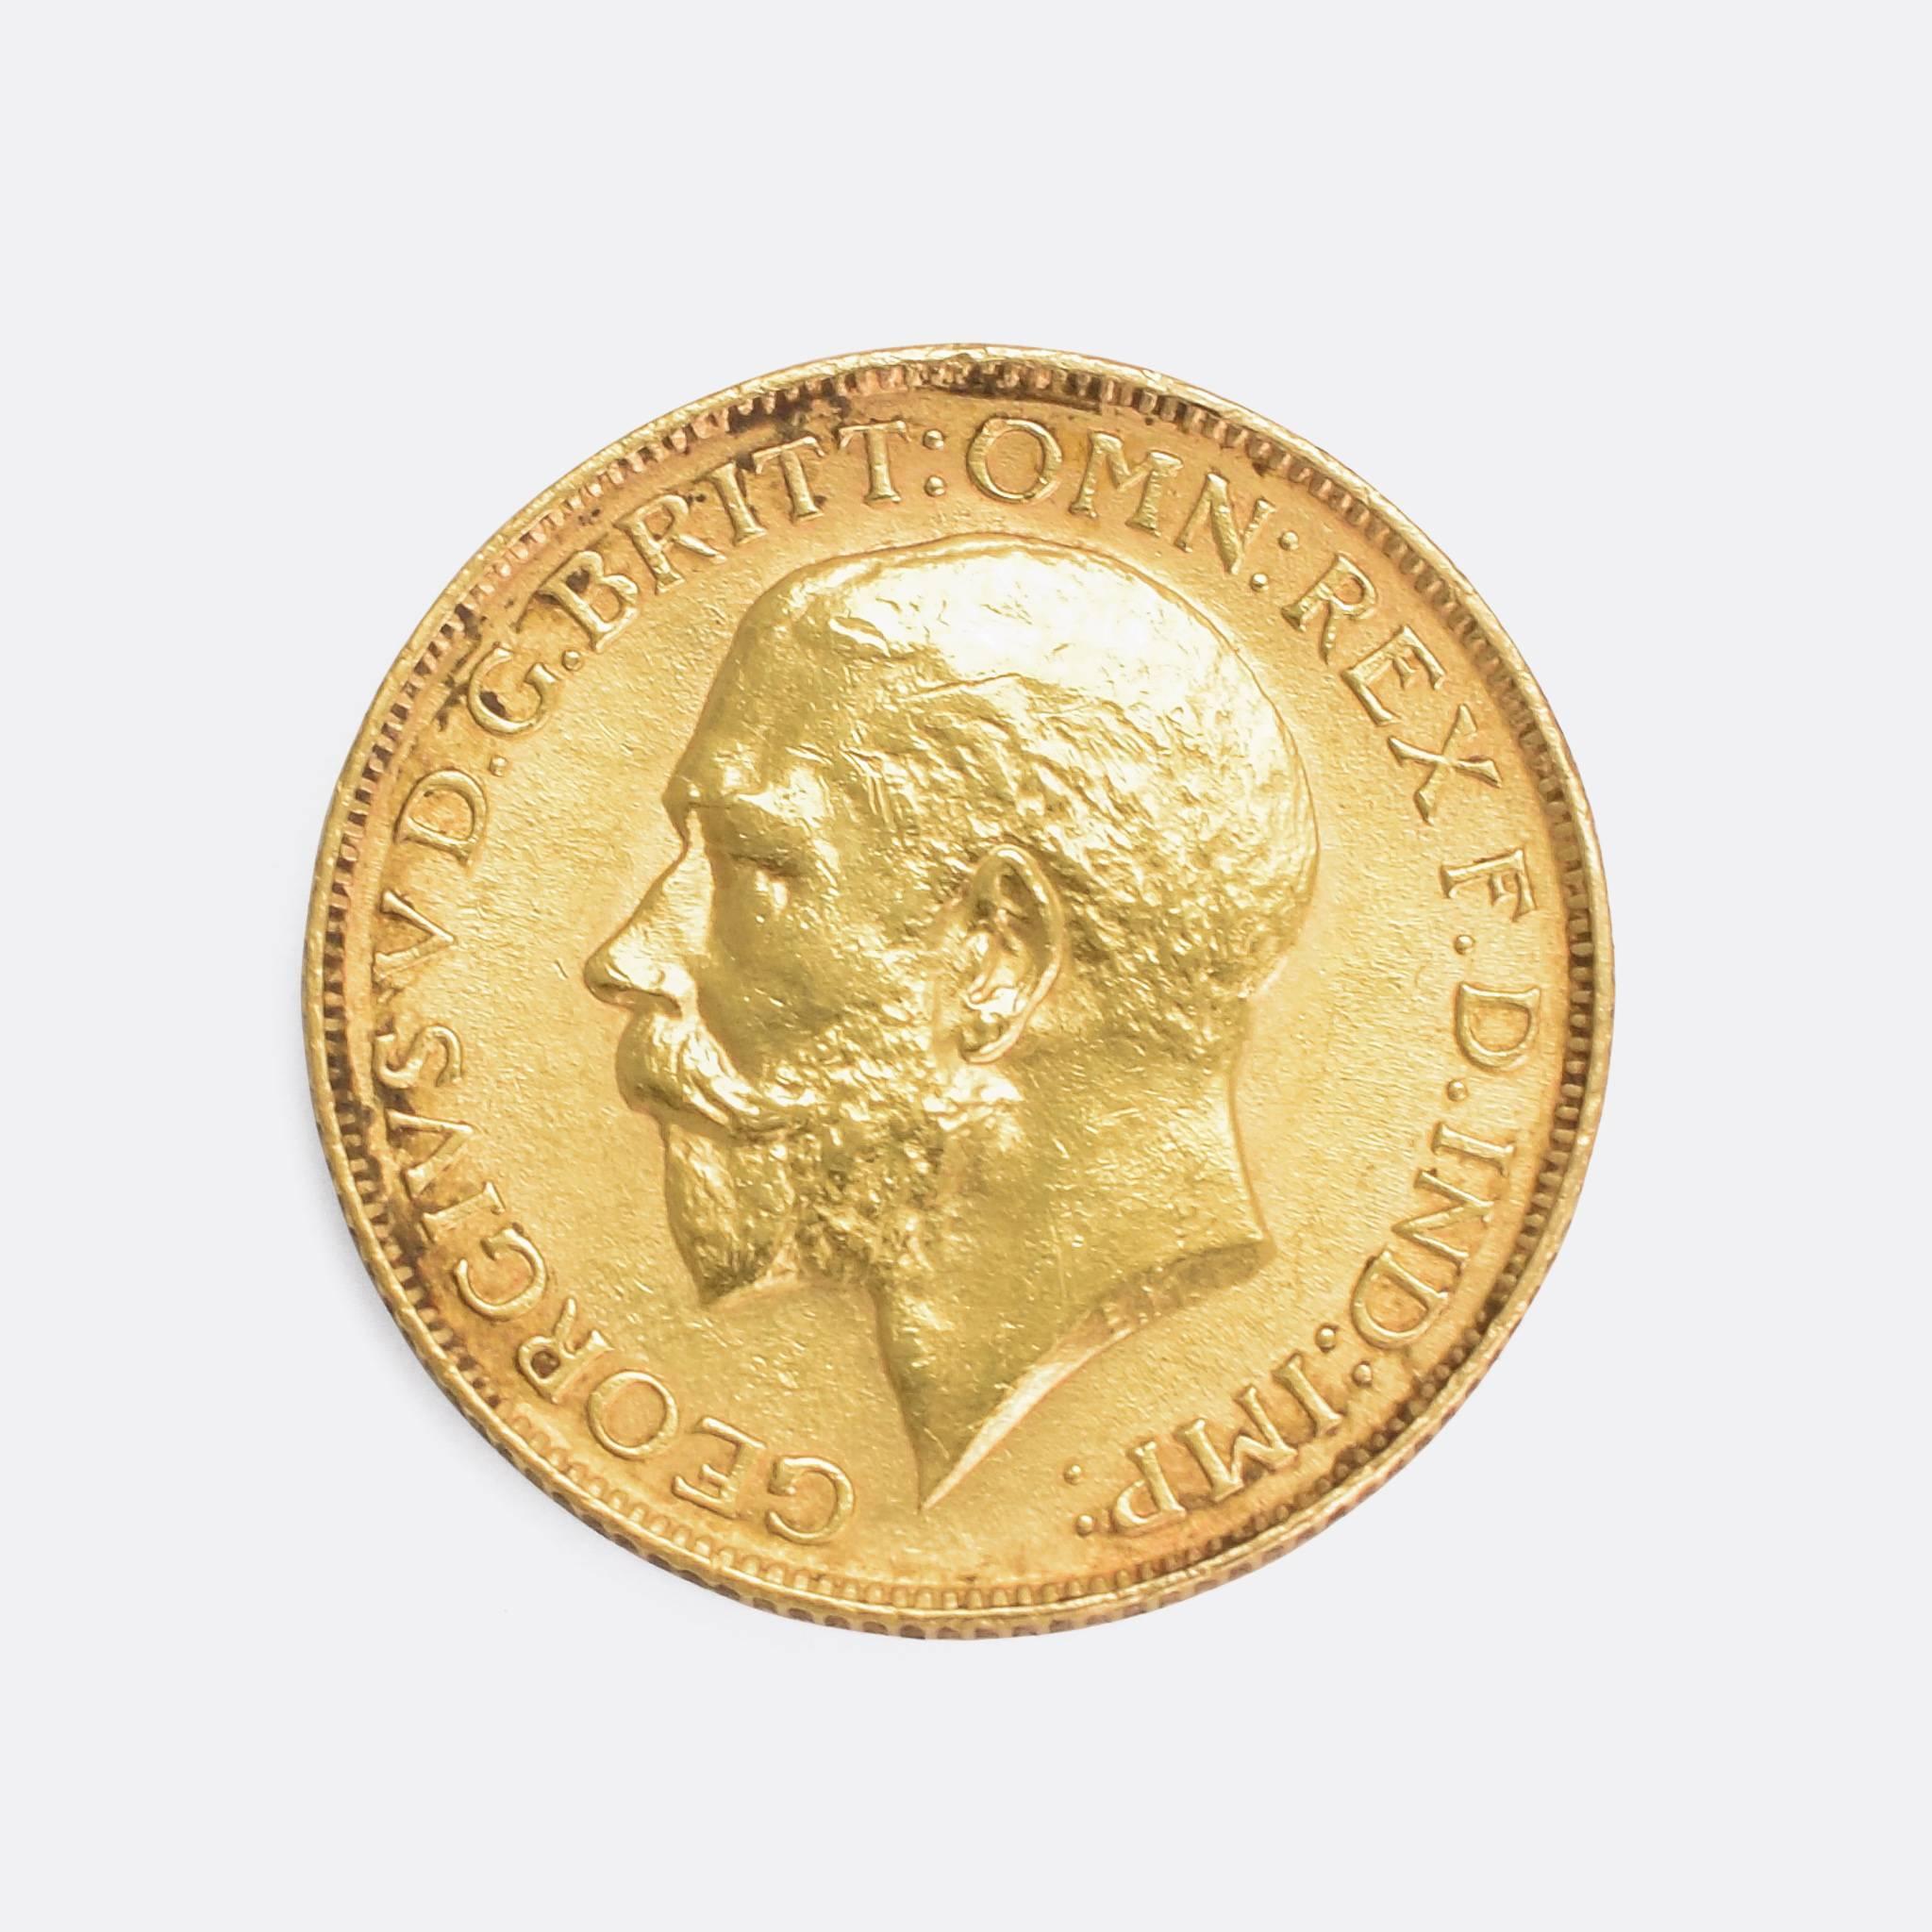 An original Full Sovereign coin dating from 1912. To one side is St George slaying the Dragon, beautifully portrayed in releif; to the other is the head of King George V facing left. Modelled in 22 Karat gold.

MEASUREMENTS 
Diameter: